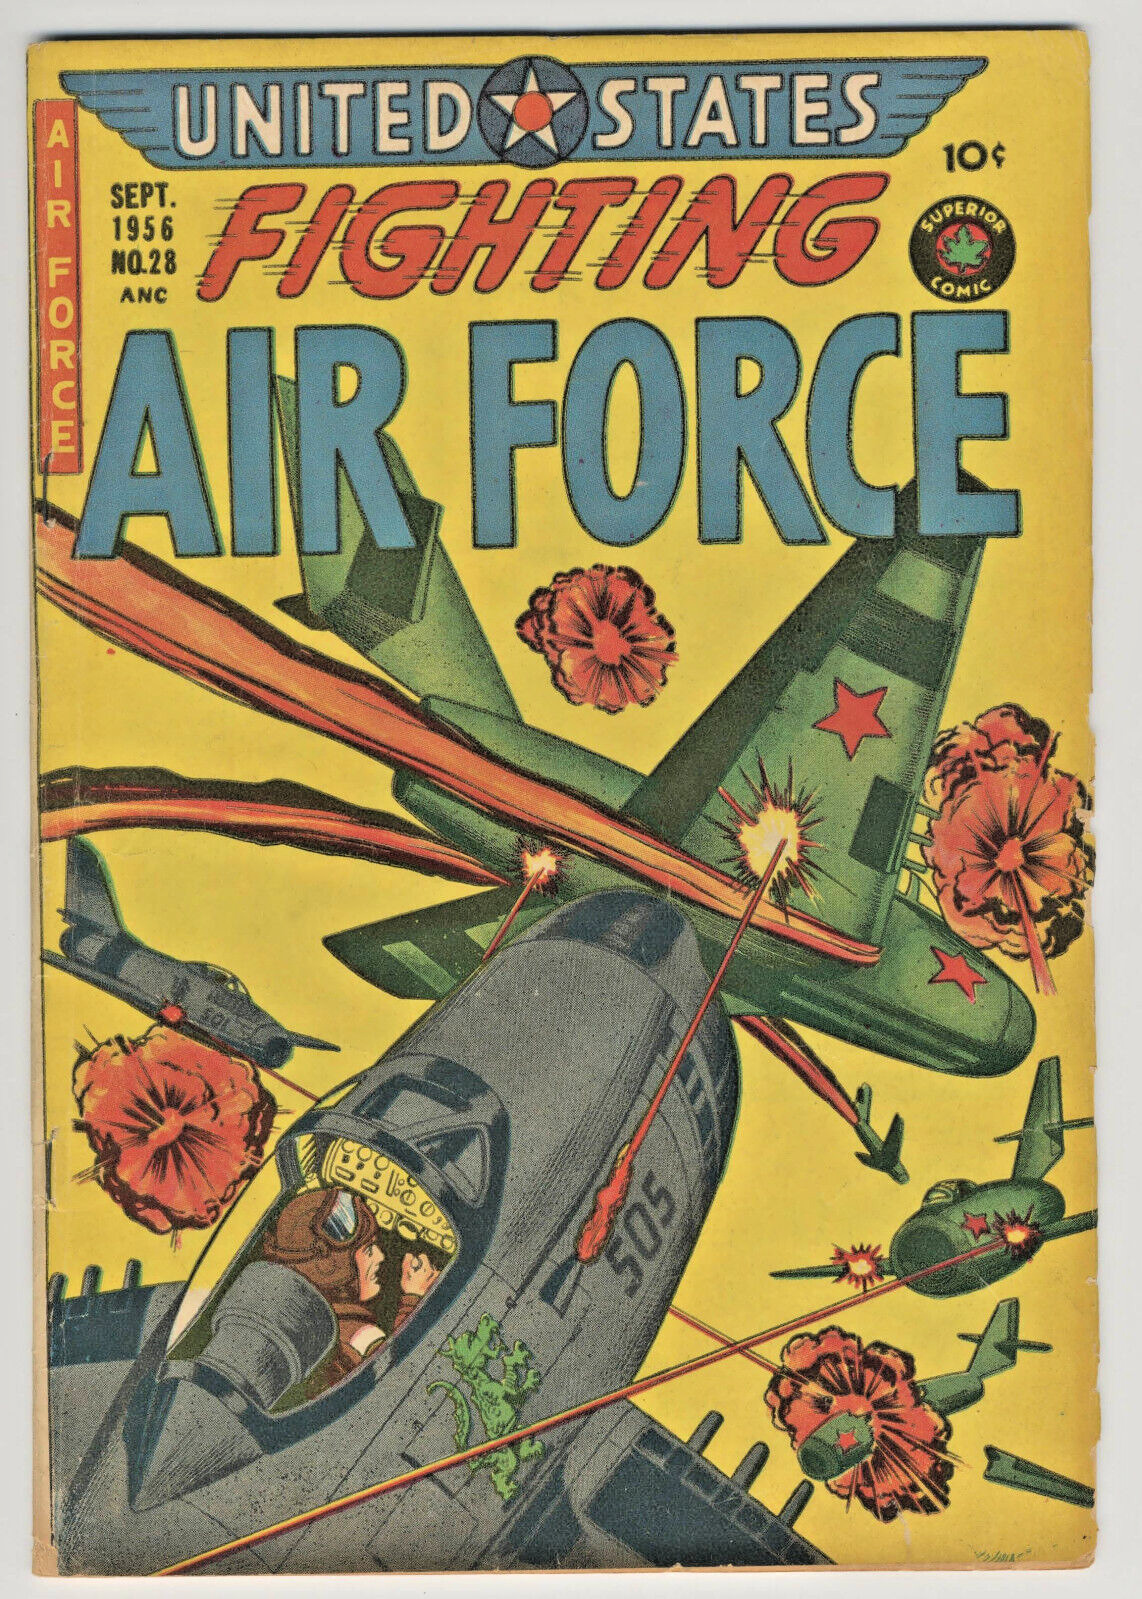 United States Fighting Air Force No. 28 - September 1956